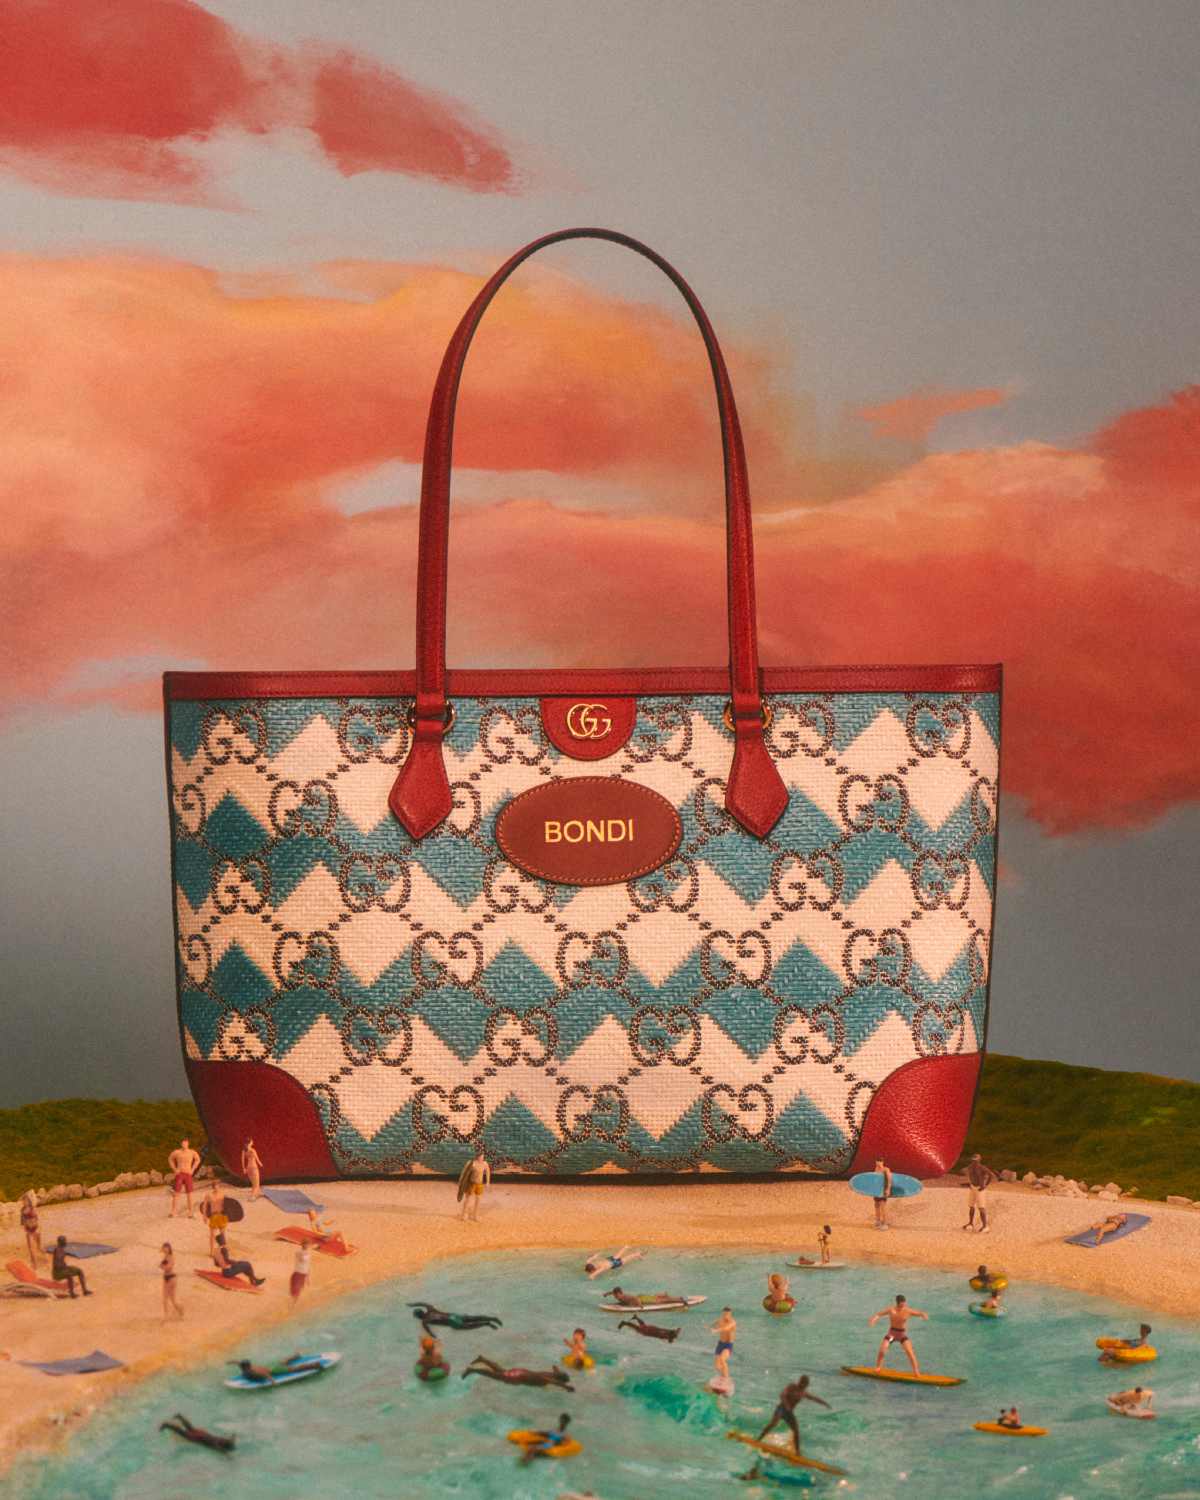 Gucci Presents Its New Resort Collection